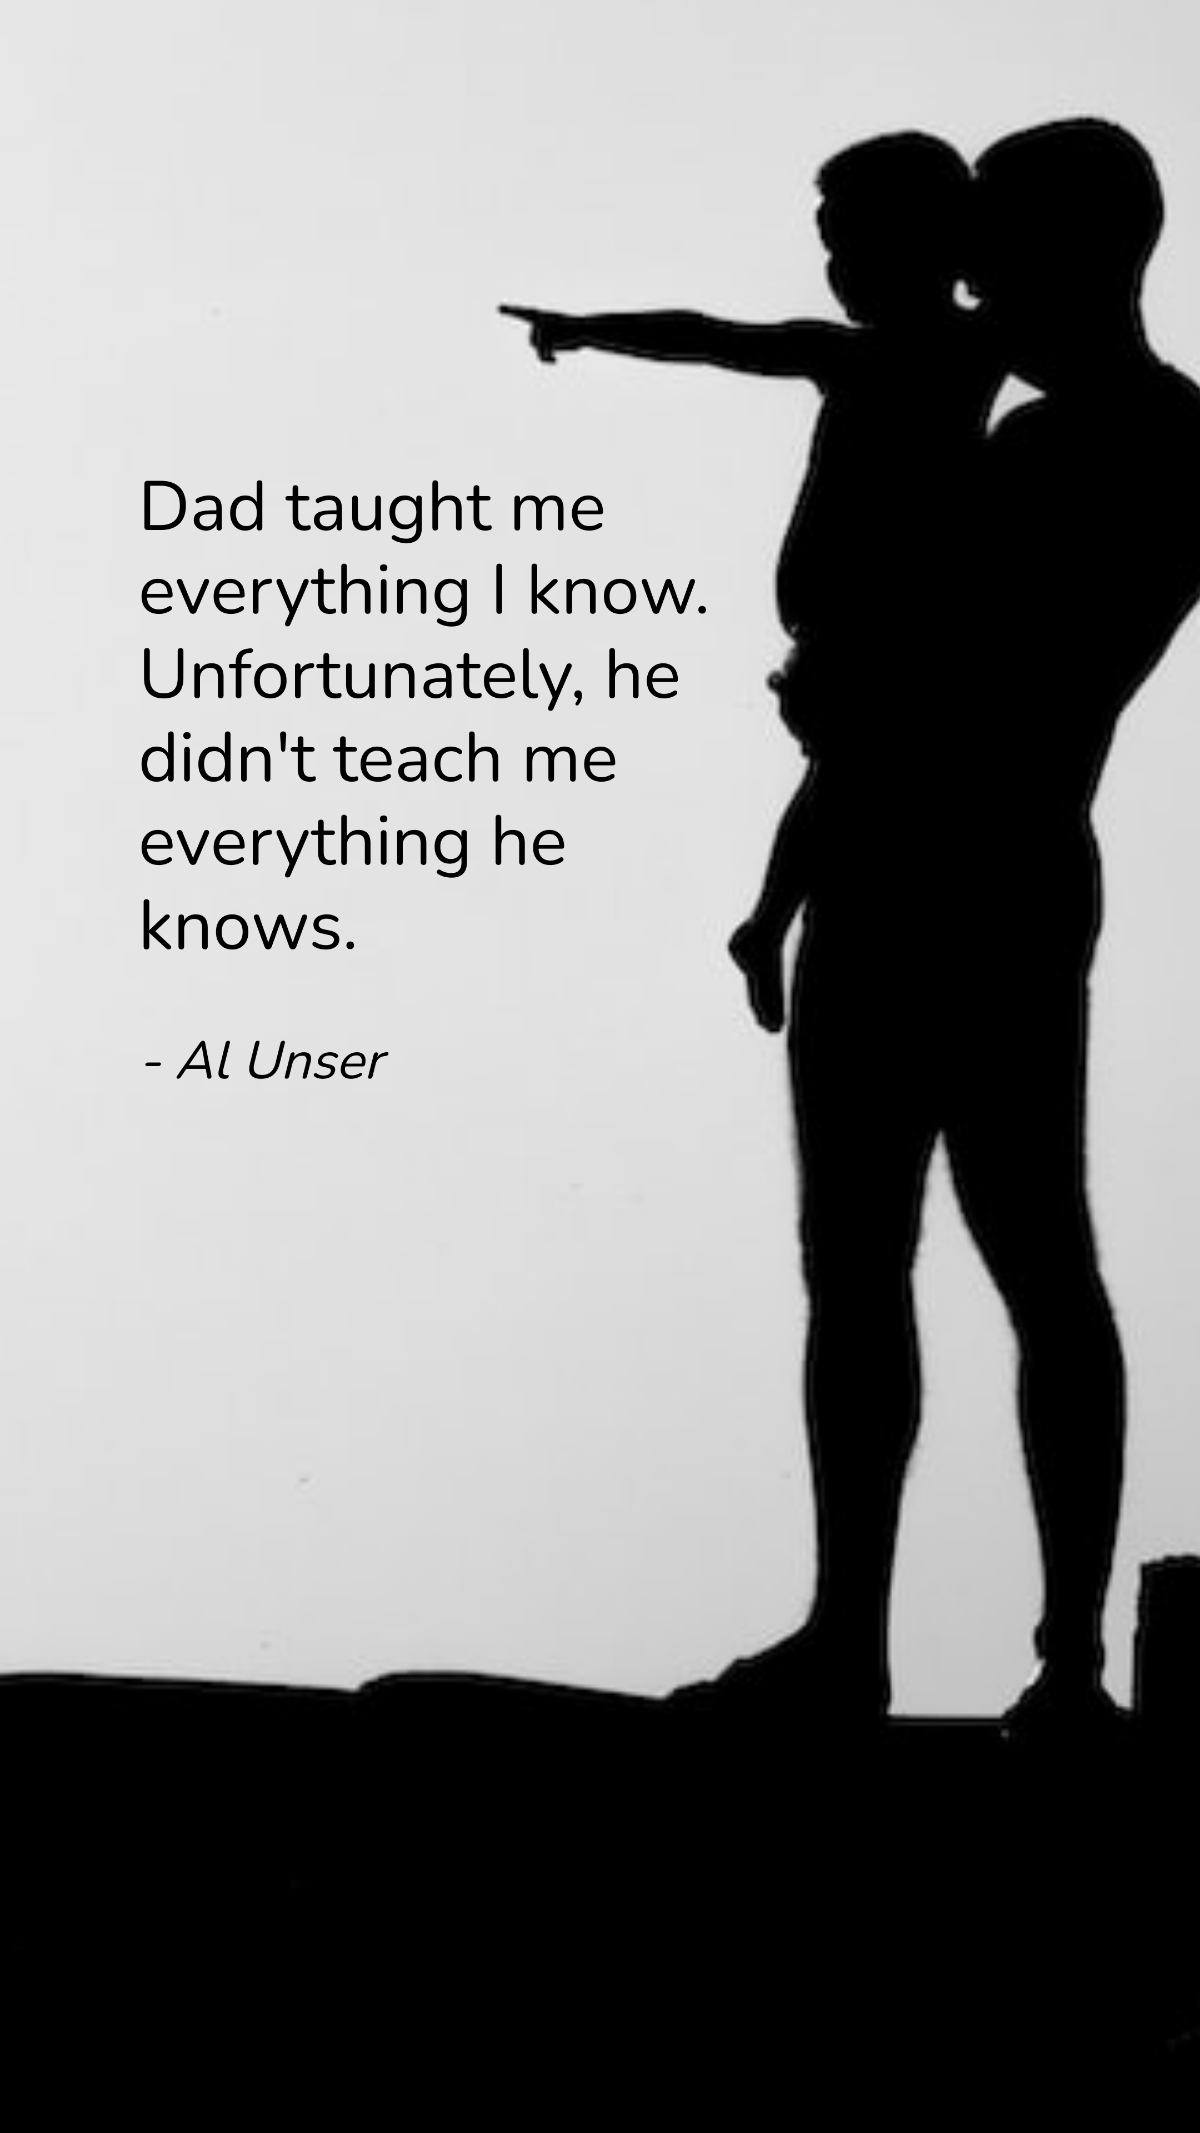 Al Unser - Dad taught me everything I know. Unfortunately, he didn't teach me everything he knows. Template